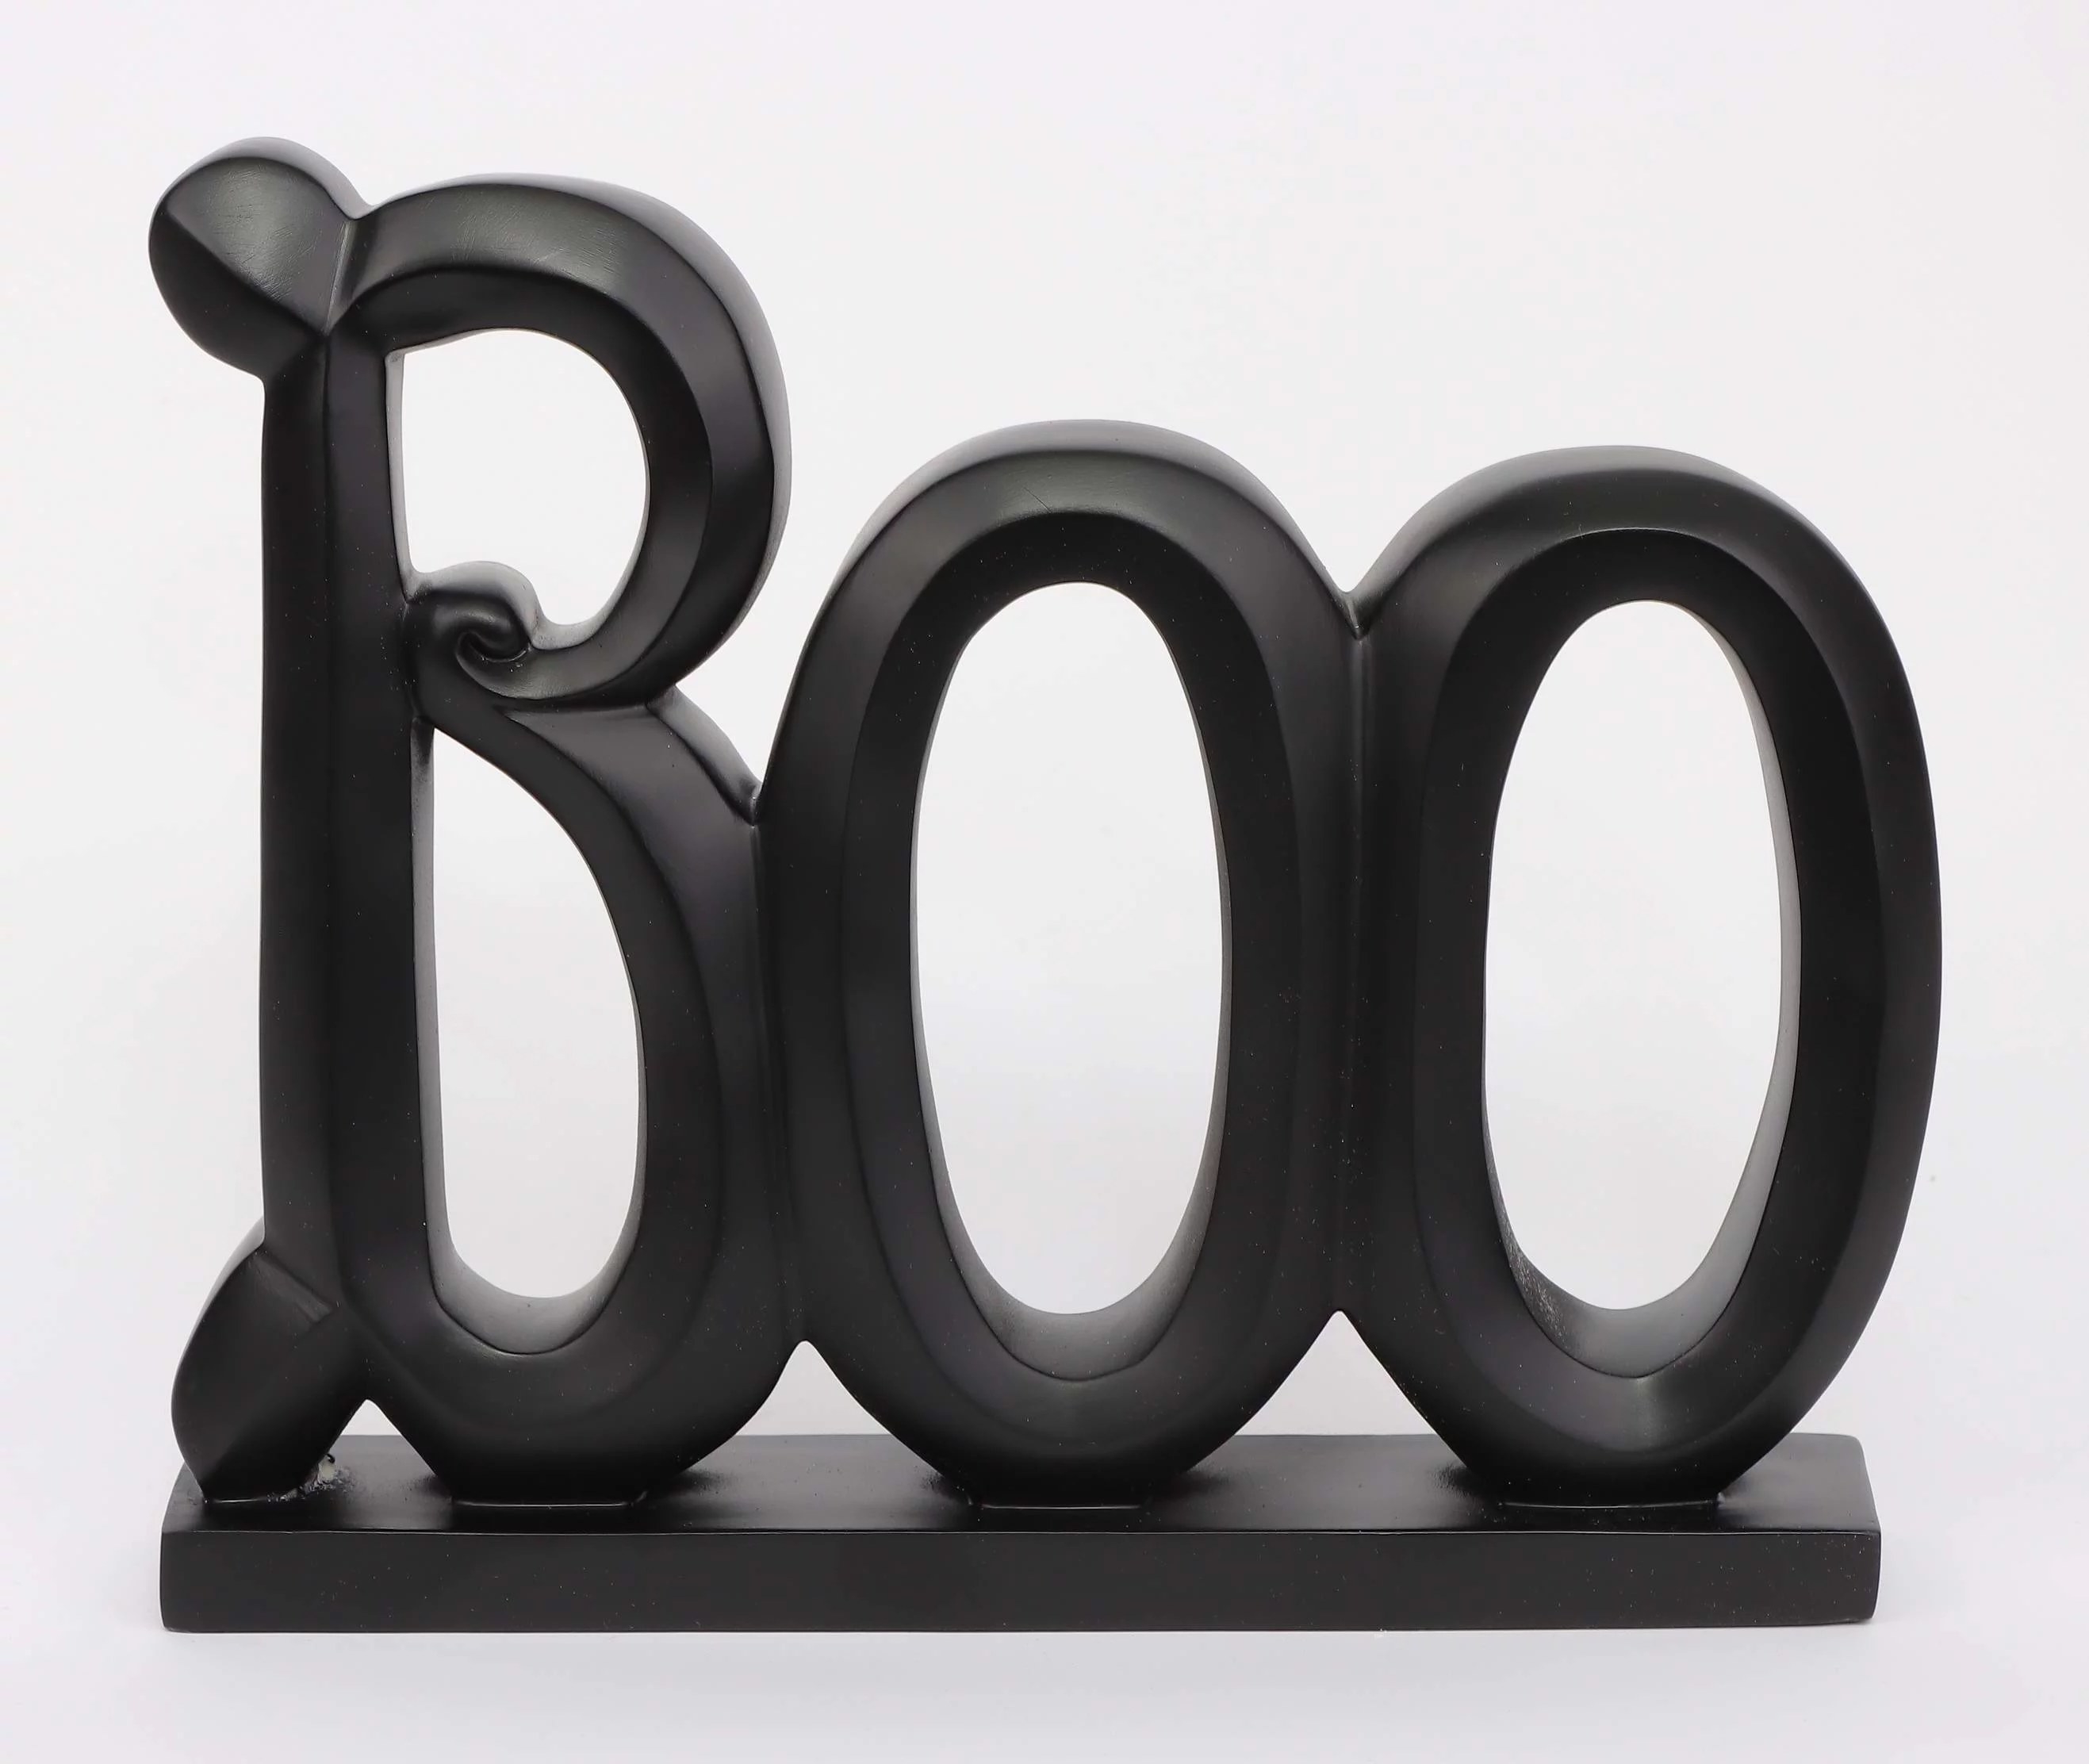 Black boo letters